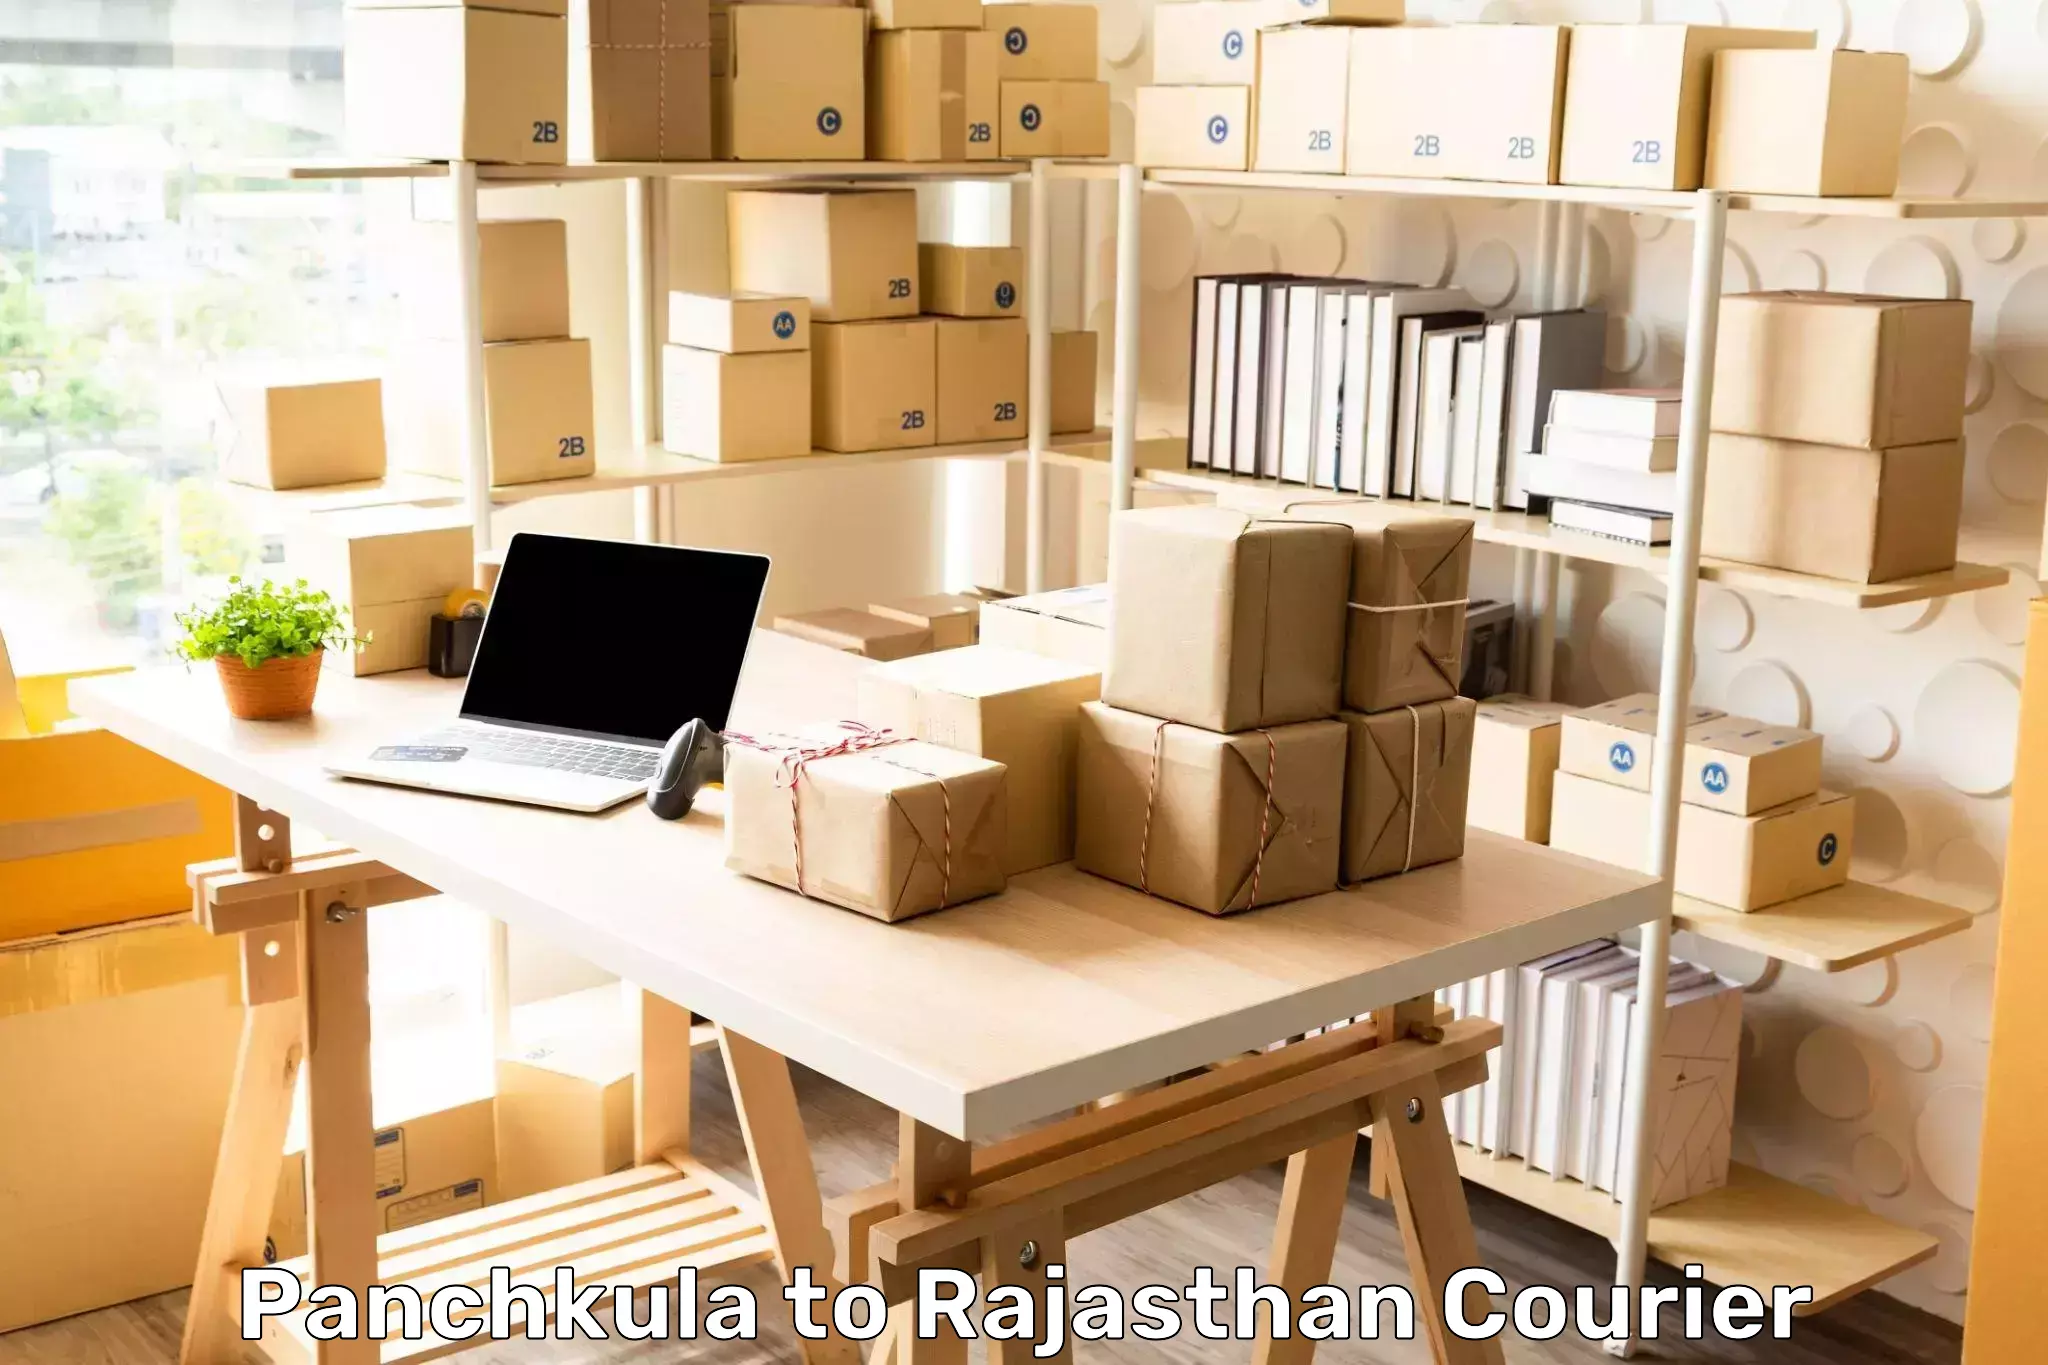 Efficient courier operations in Panchkula to Pilani